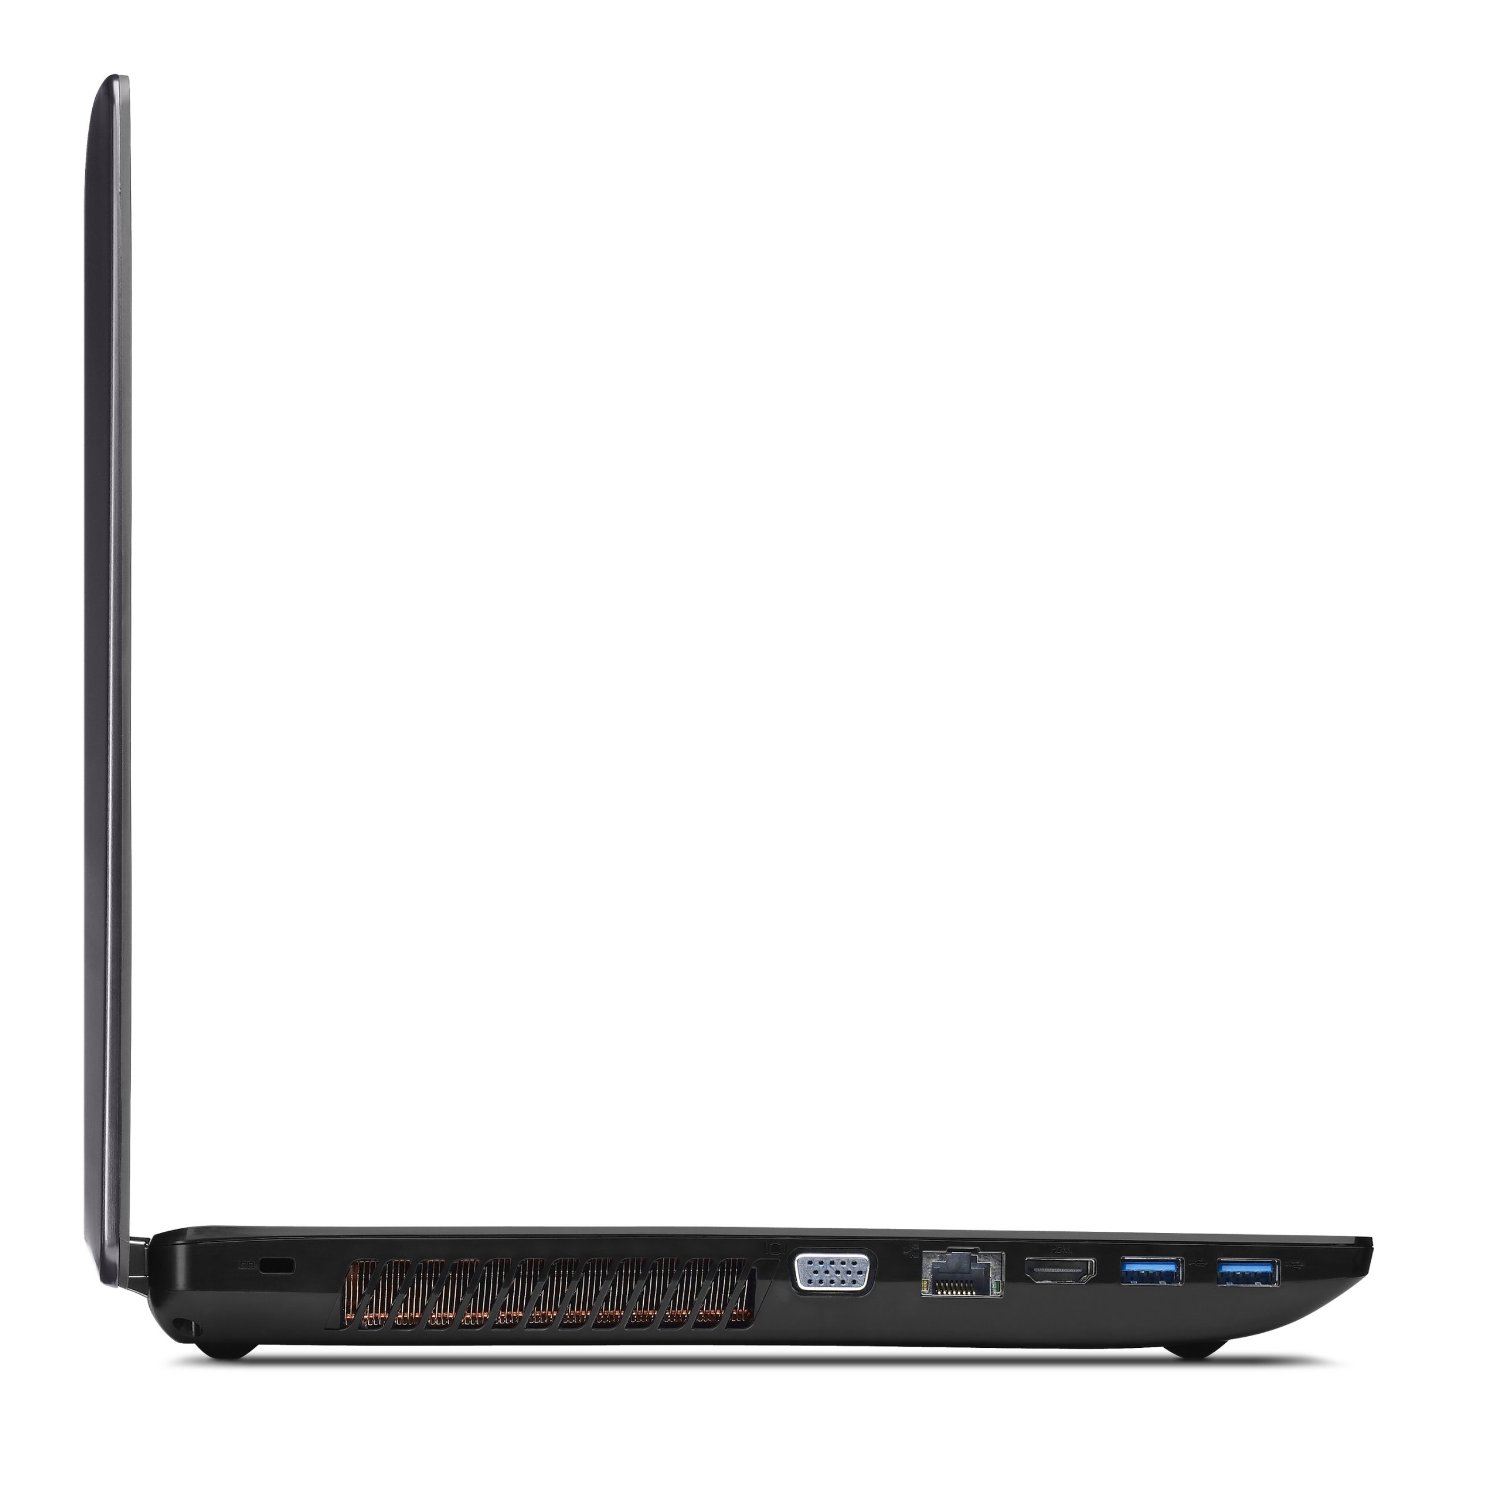 http://thetechjournal.com/wp-content/uploads/images/1209/1346654145-lenovos-bulky-ideapad-y580-156inch-laptop-4.jpg